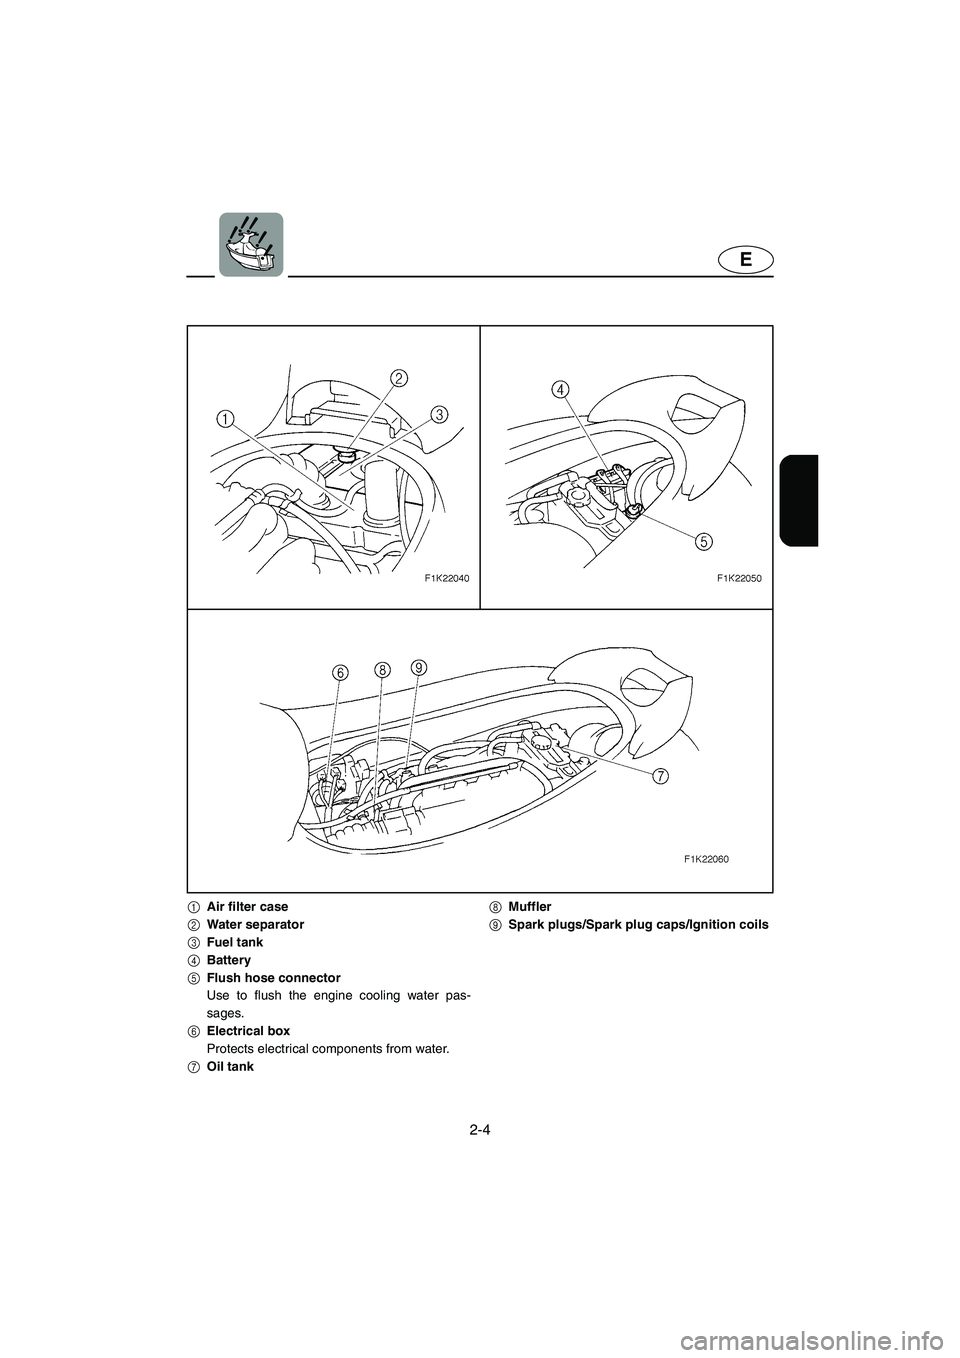 YAMAHA VX 2006  Owners Manual 2-4
E
1Air filter case
2Water separator
3Fuel tank
4Battery
5Flush hose connector
Use to flush the engine cooling water pas-
sages.
6Electrical box
Protects electrical components from water.
7Oil tank